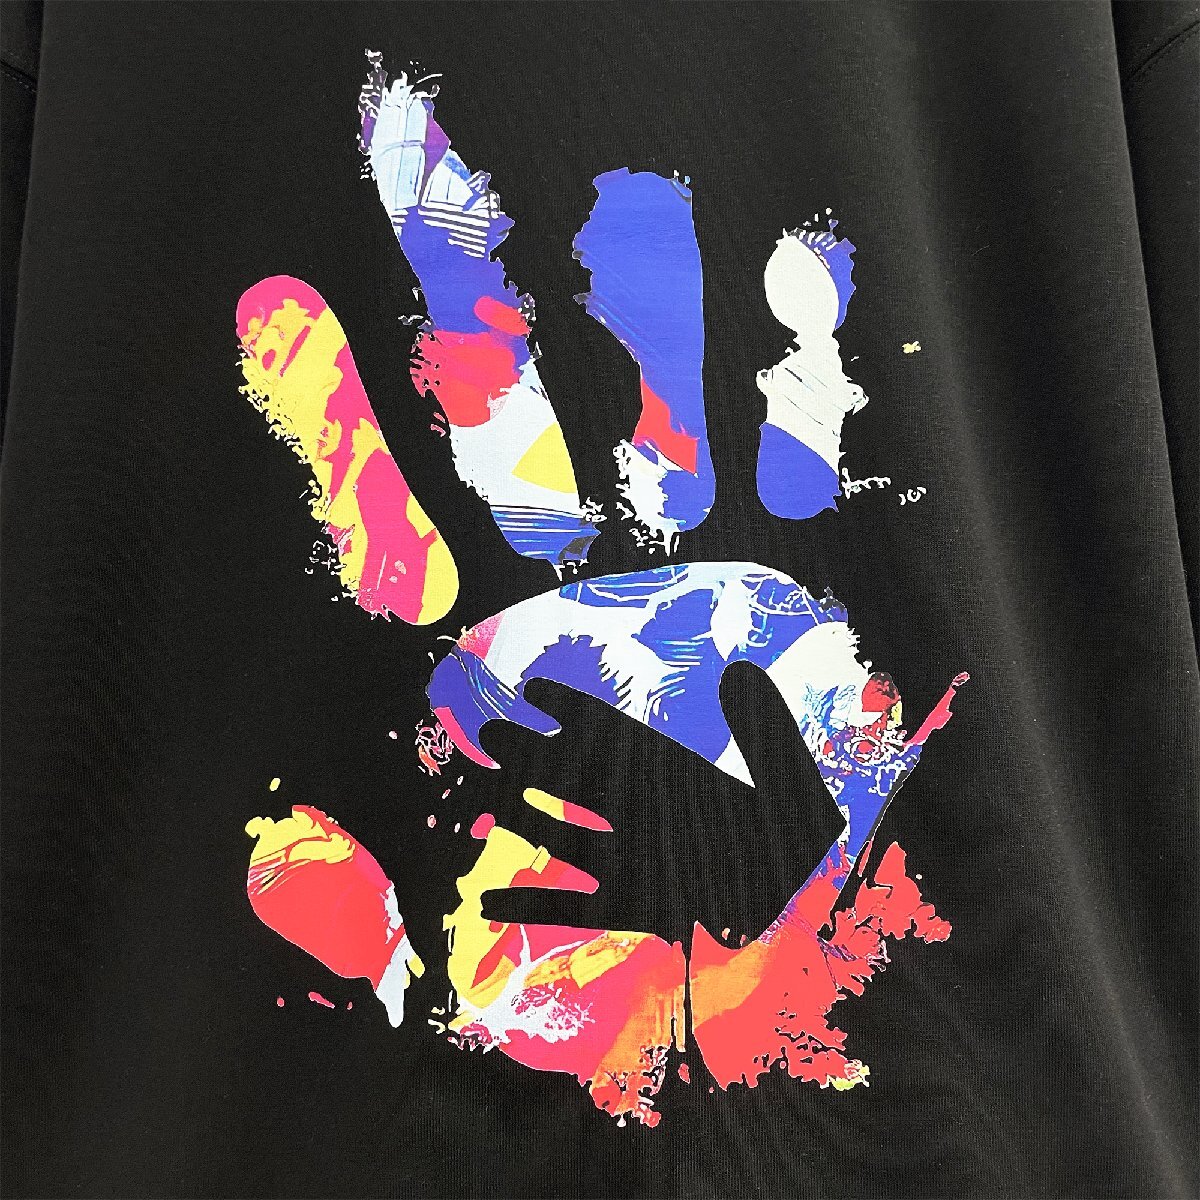  popular regular price 4 ten thousand FRANKLIN MUSK* America * New York departure sweatshirt fine quality soft colorful . hand cut and sewn Street size 3